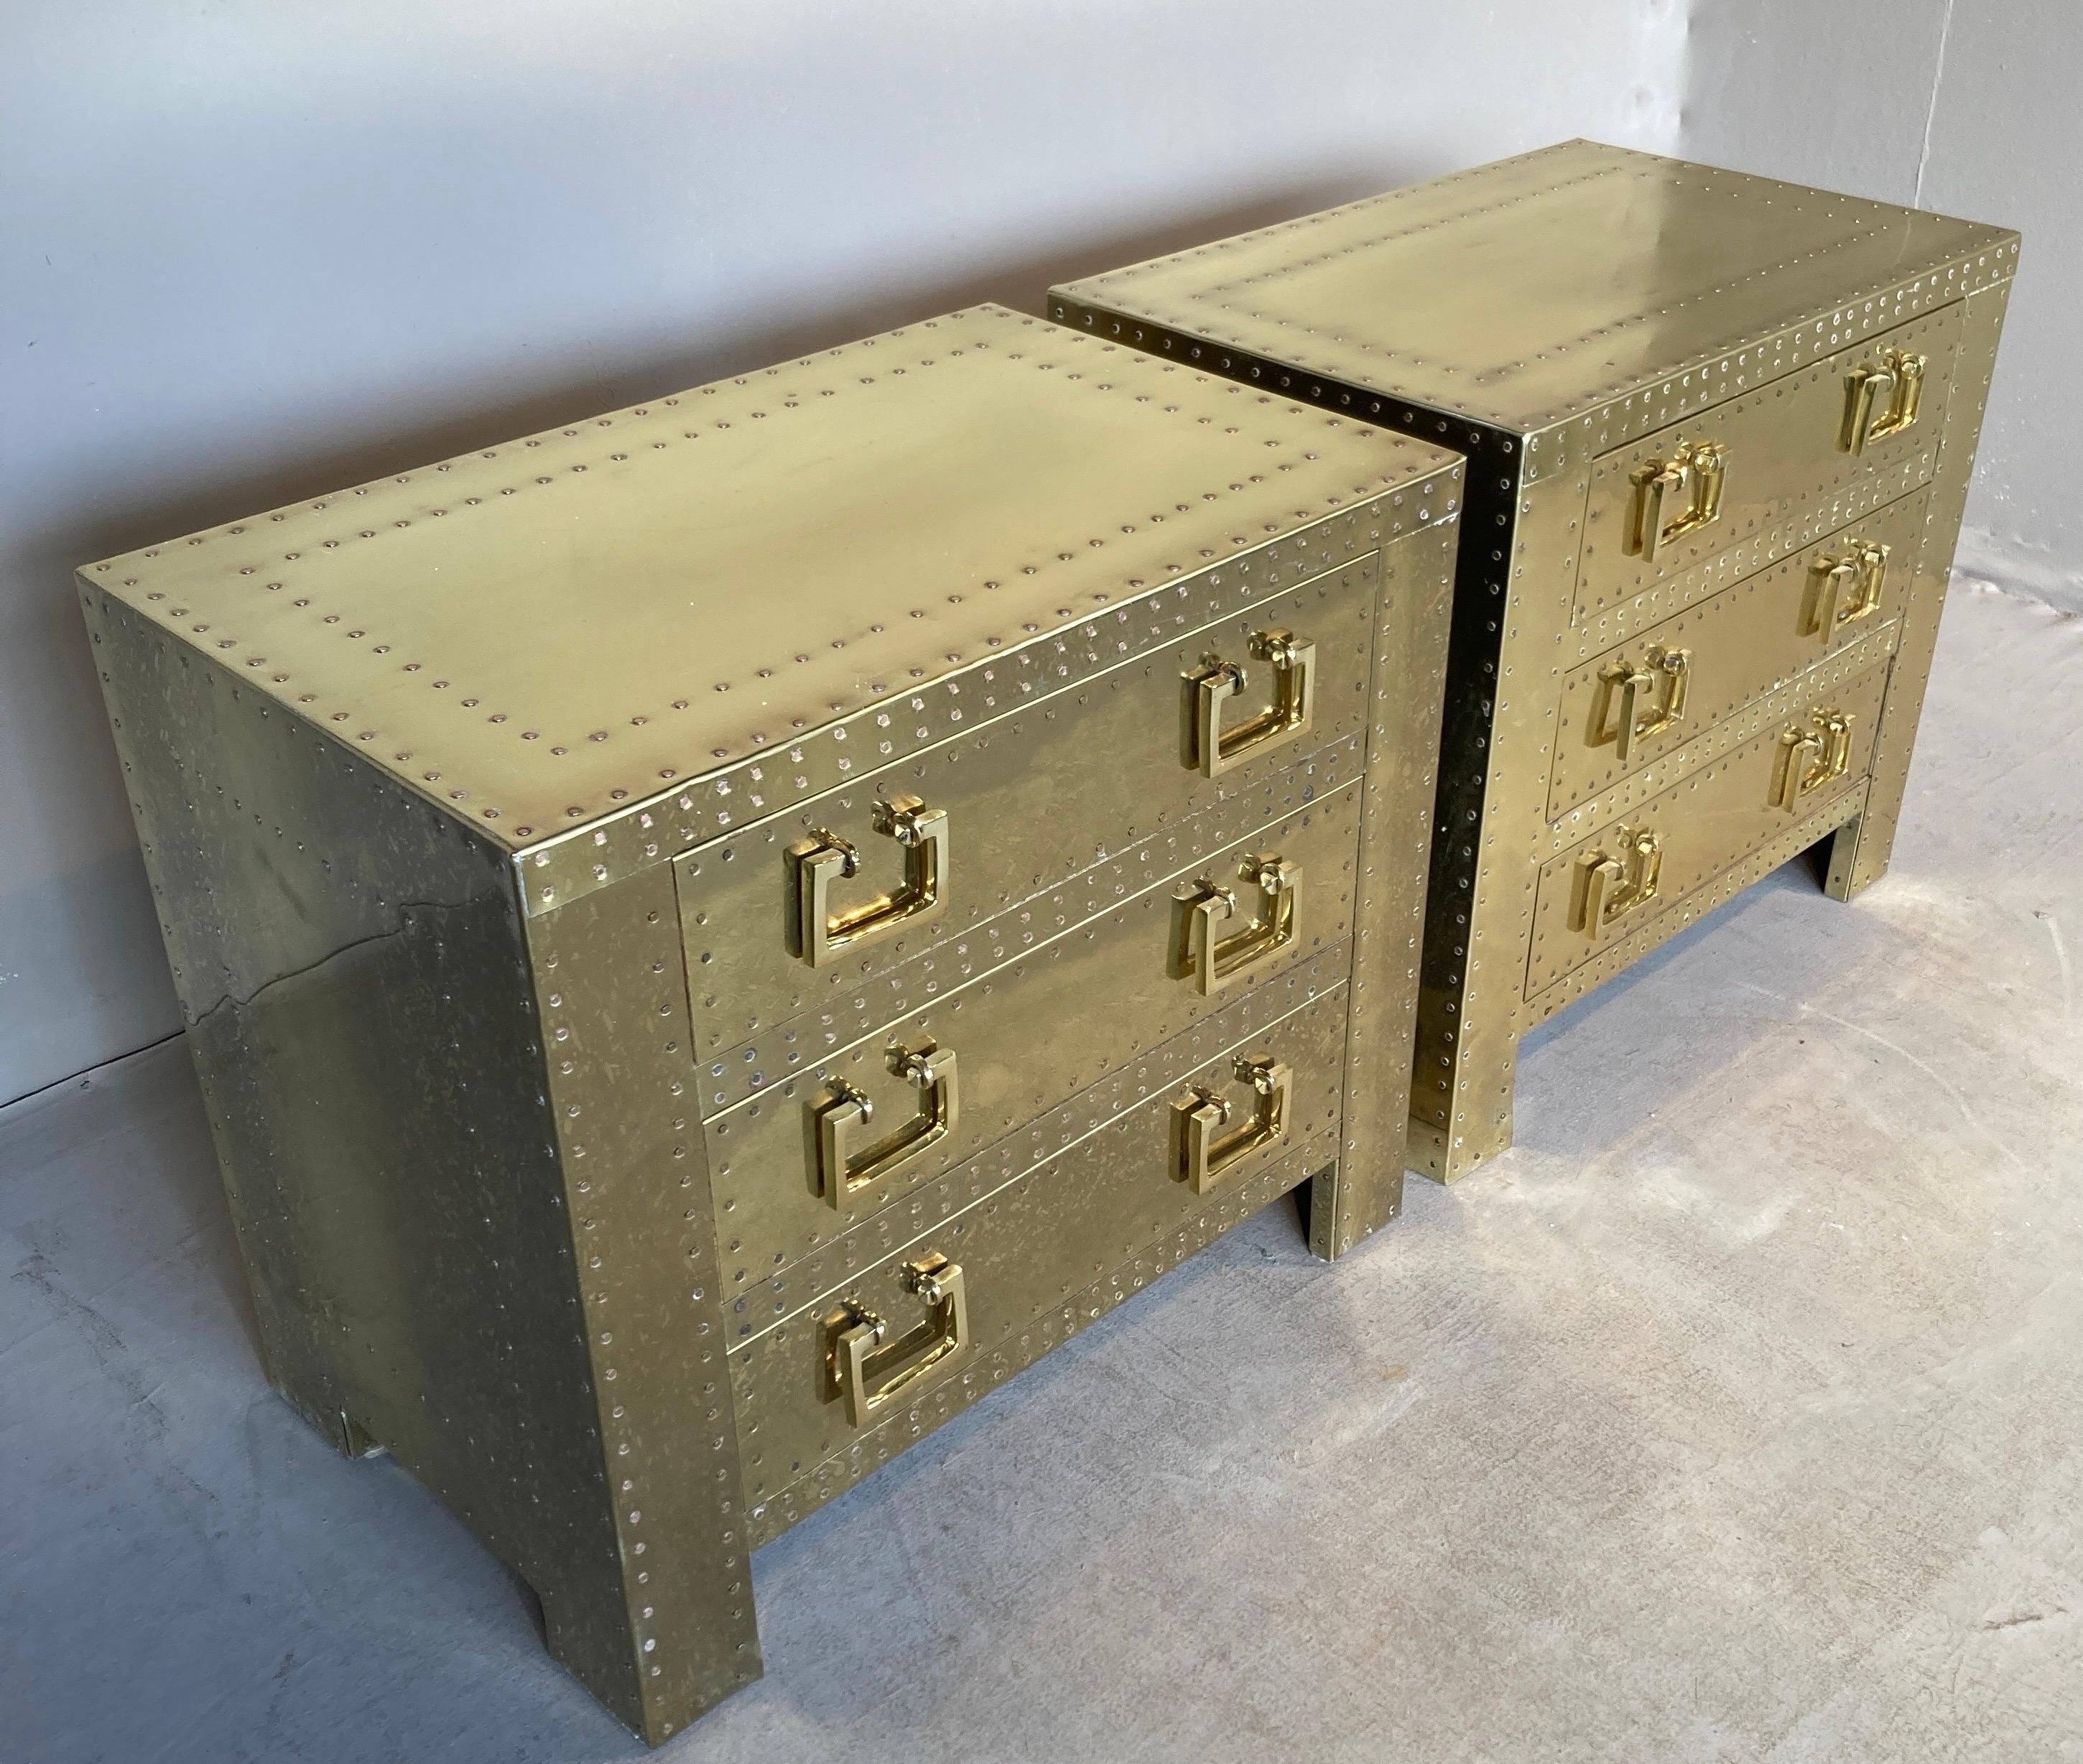 Hard-to-find assembled pair of vintage 1970s brass-clad campaign style end tables in the form of chests of drawers by Sarreid Ltd. in Spain. With the customary copper tacks and chunky brasses, these tables are a decorative classic. The matching